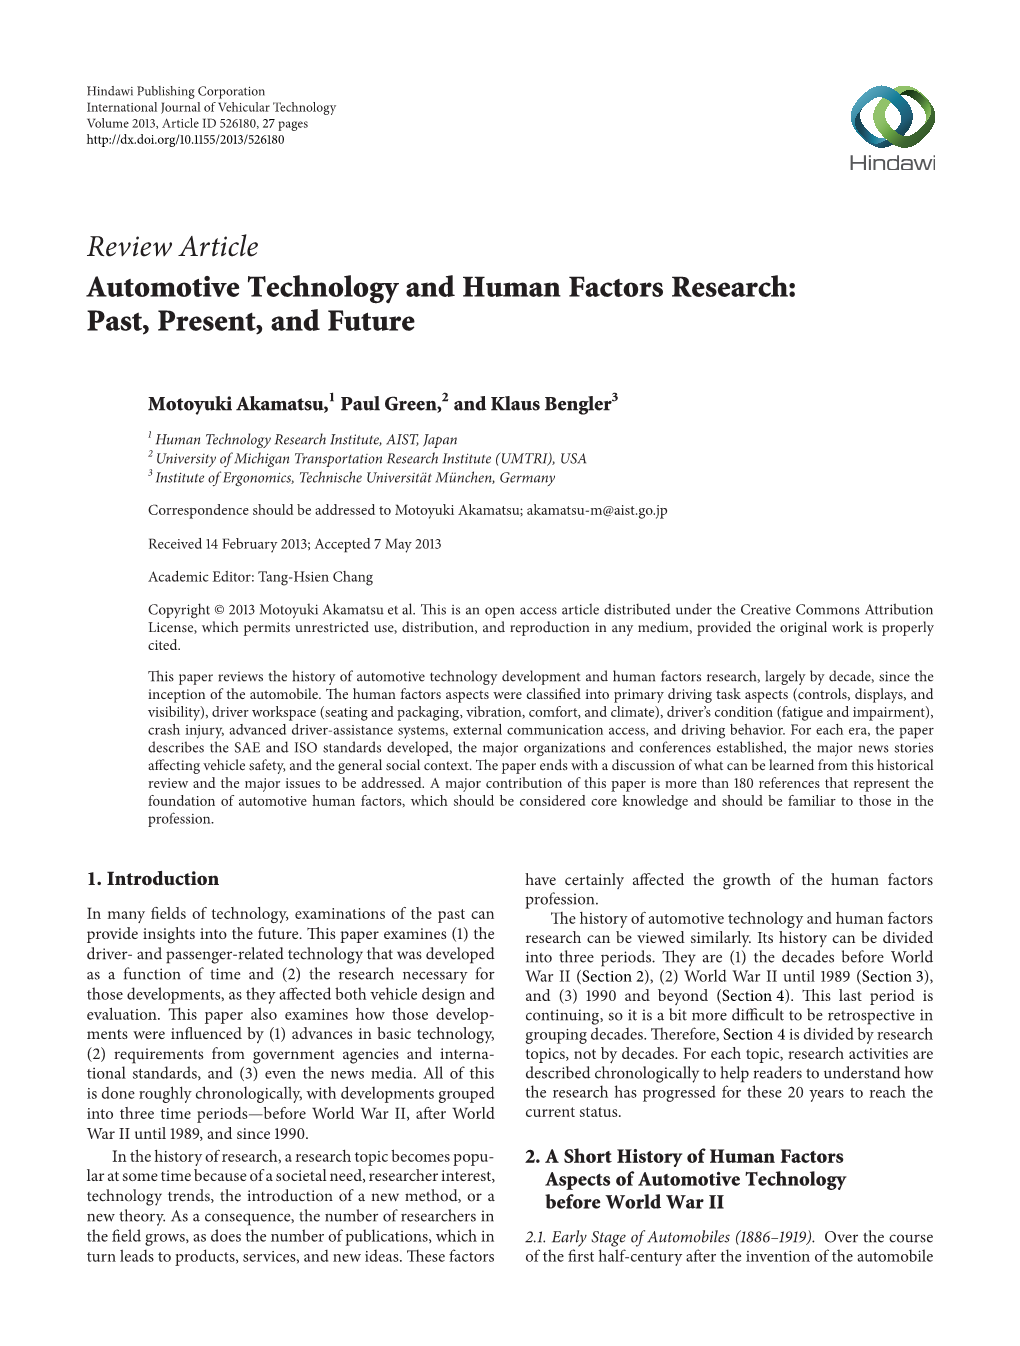 Automotive Technology and Human Factors Research: Past, Present, and Future